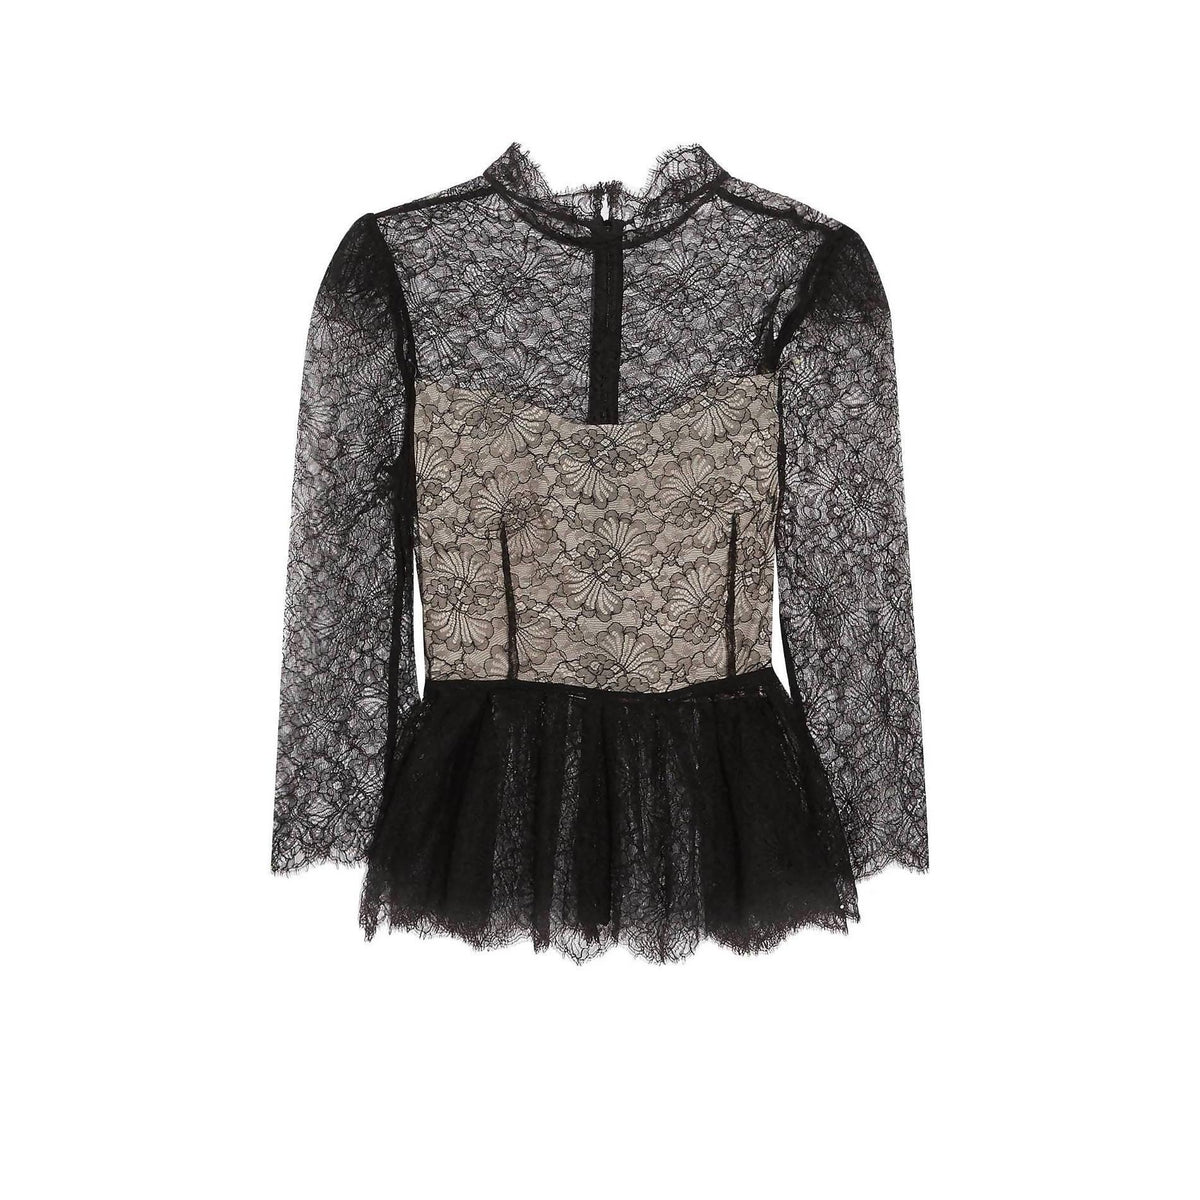 Pre-Owned VILSHENKO Black Silk Lace Blouse | Size US 4 - theREMODA